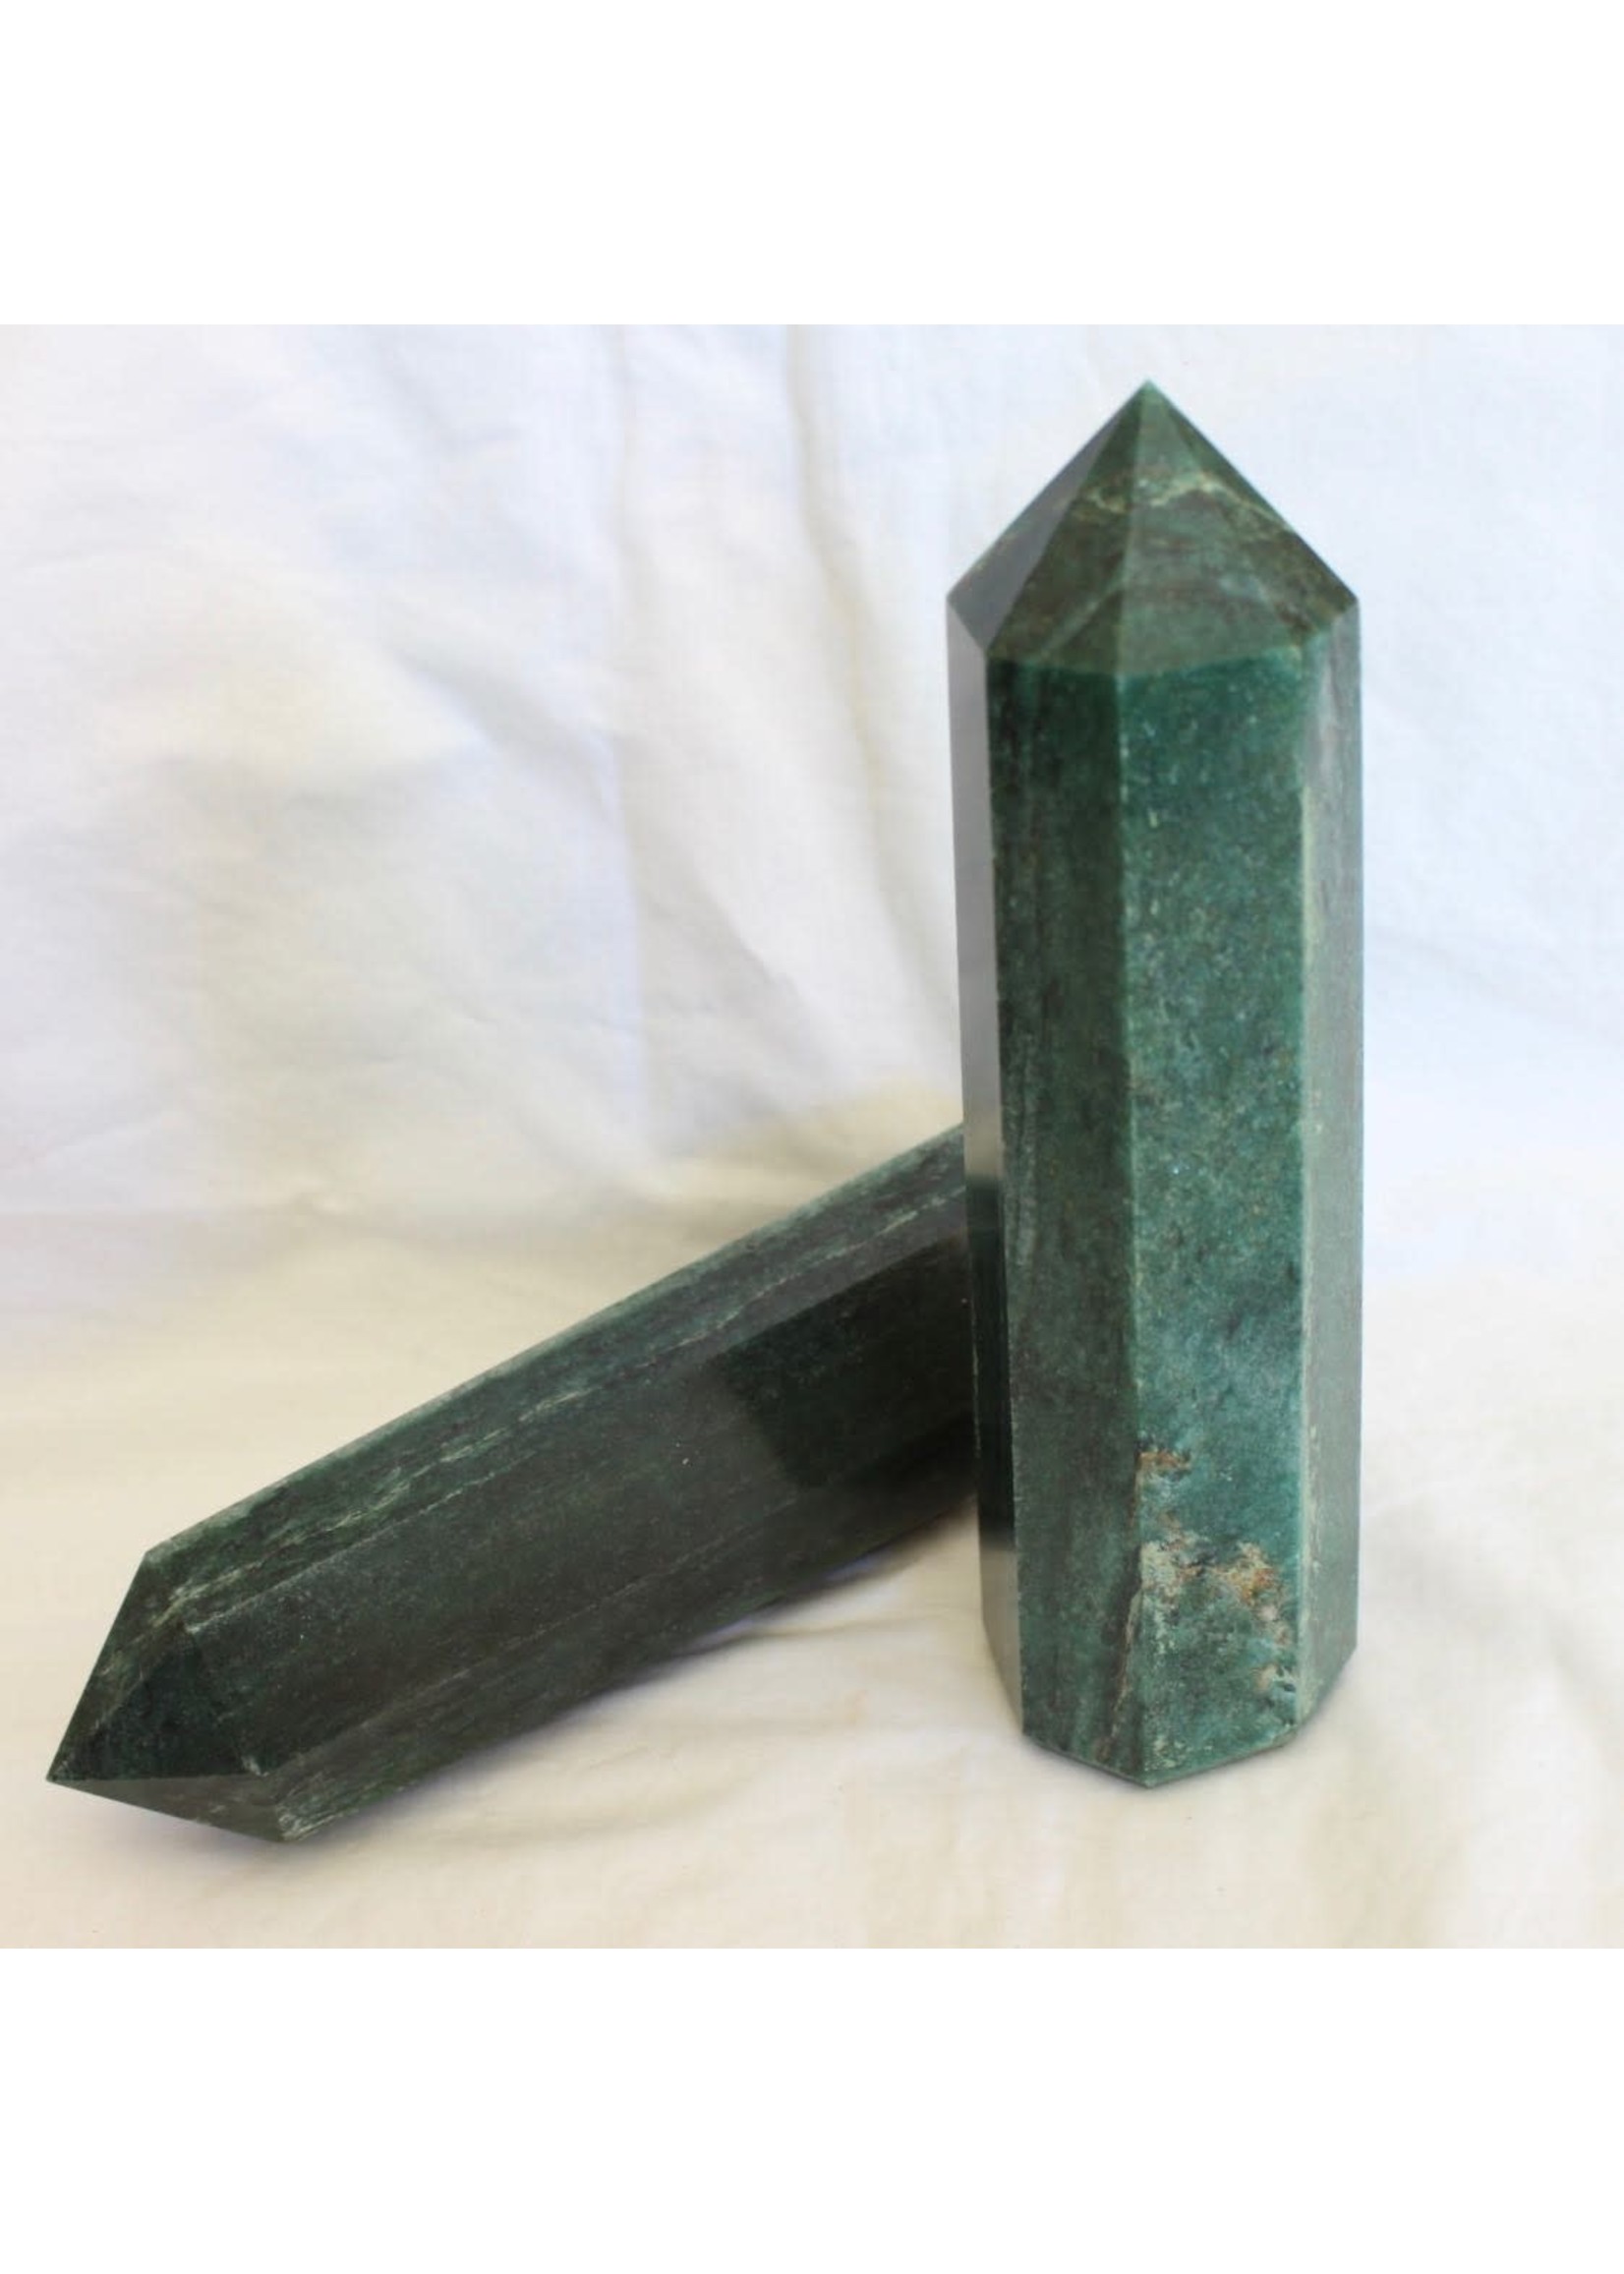 Green Aventurine 8-sided Tower powerful abundance charged in Sept Full Moon